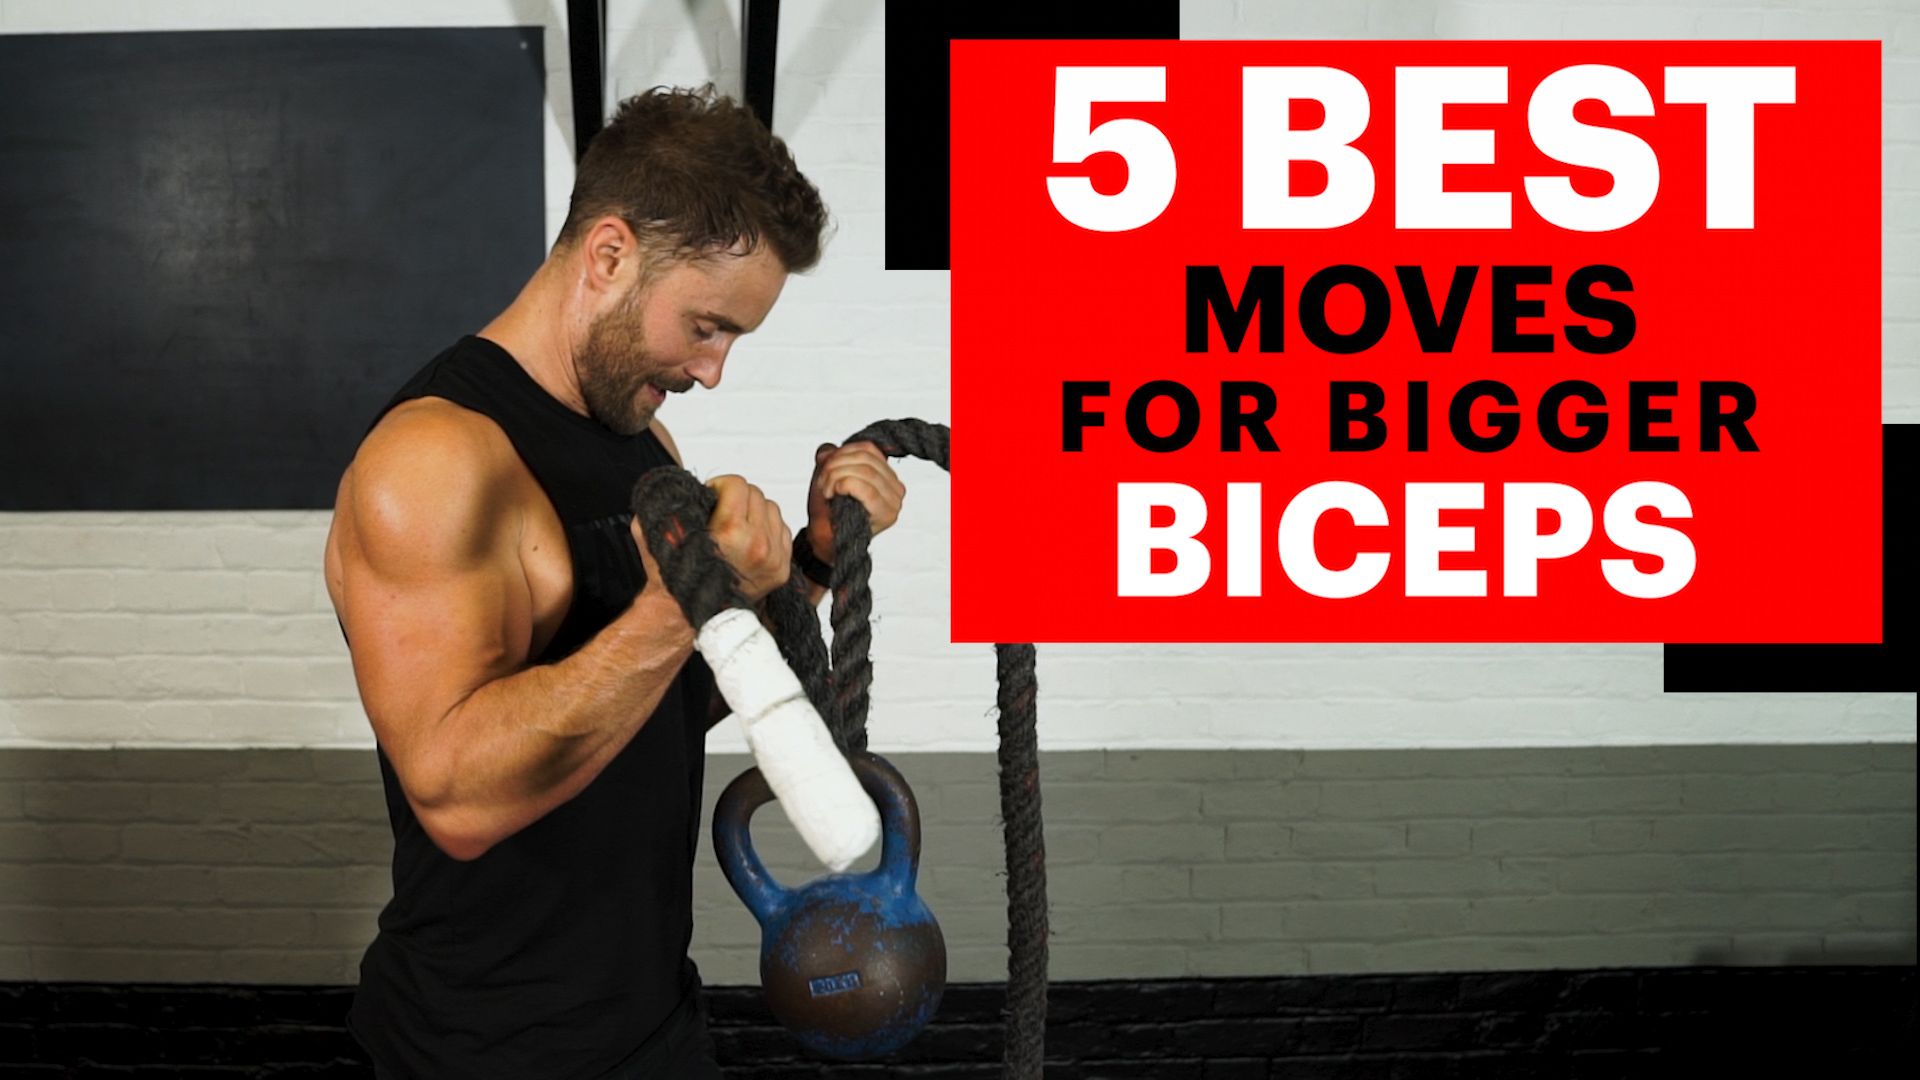 The best biceps and triceps home exercises and workout tips